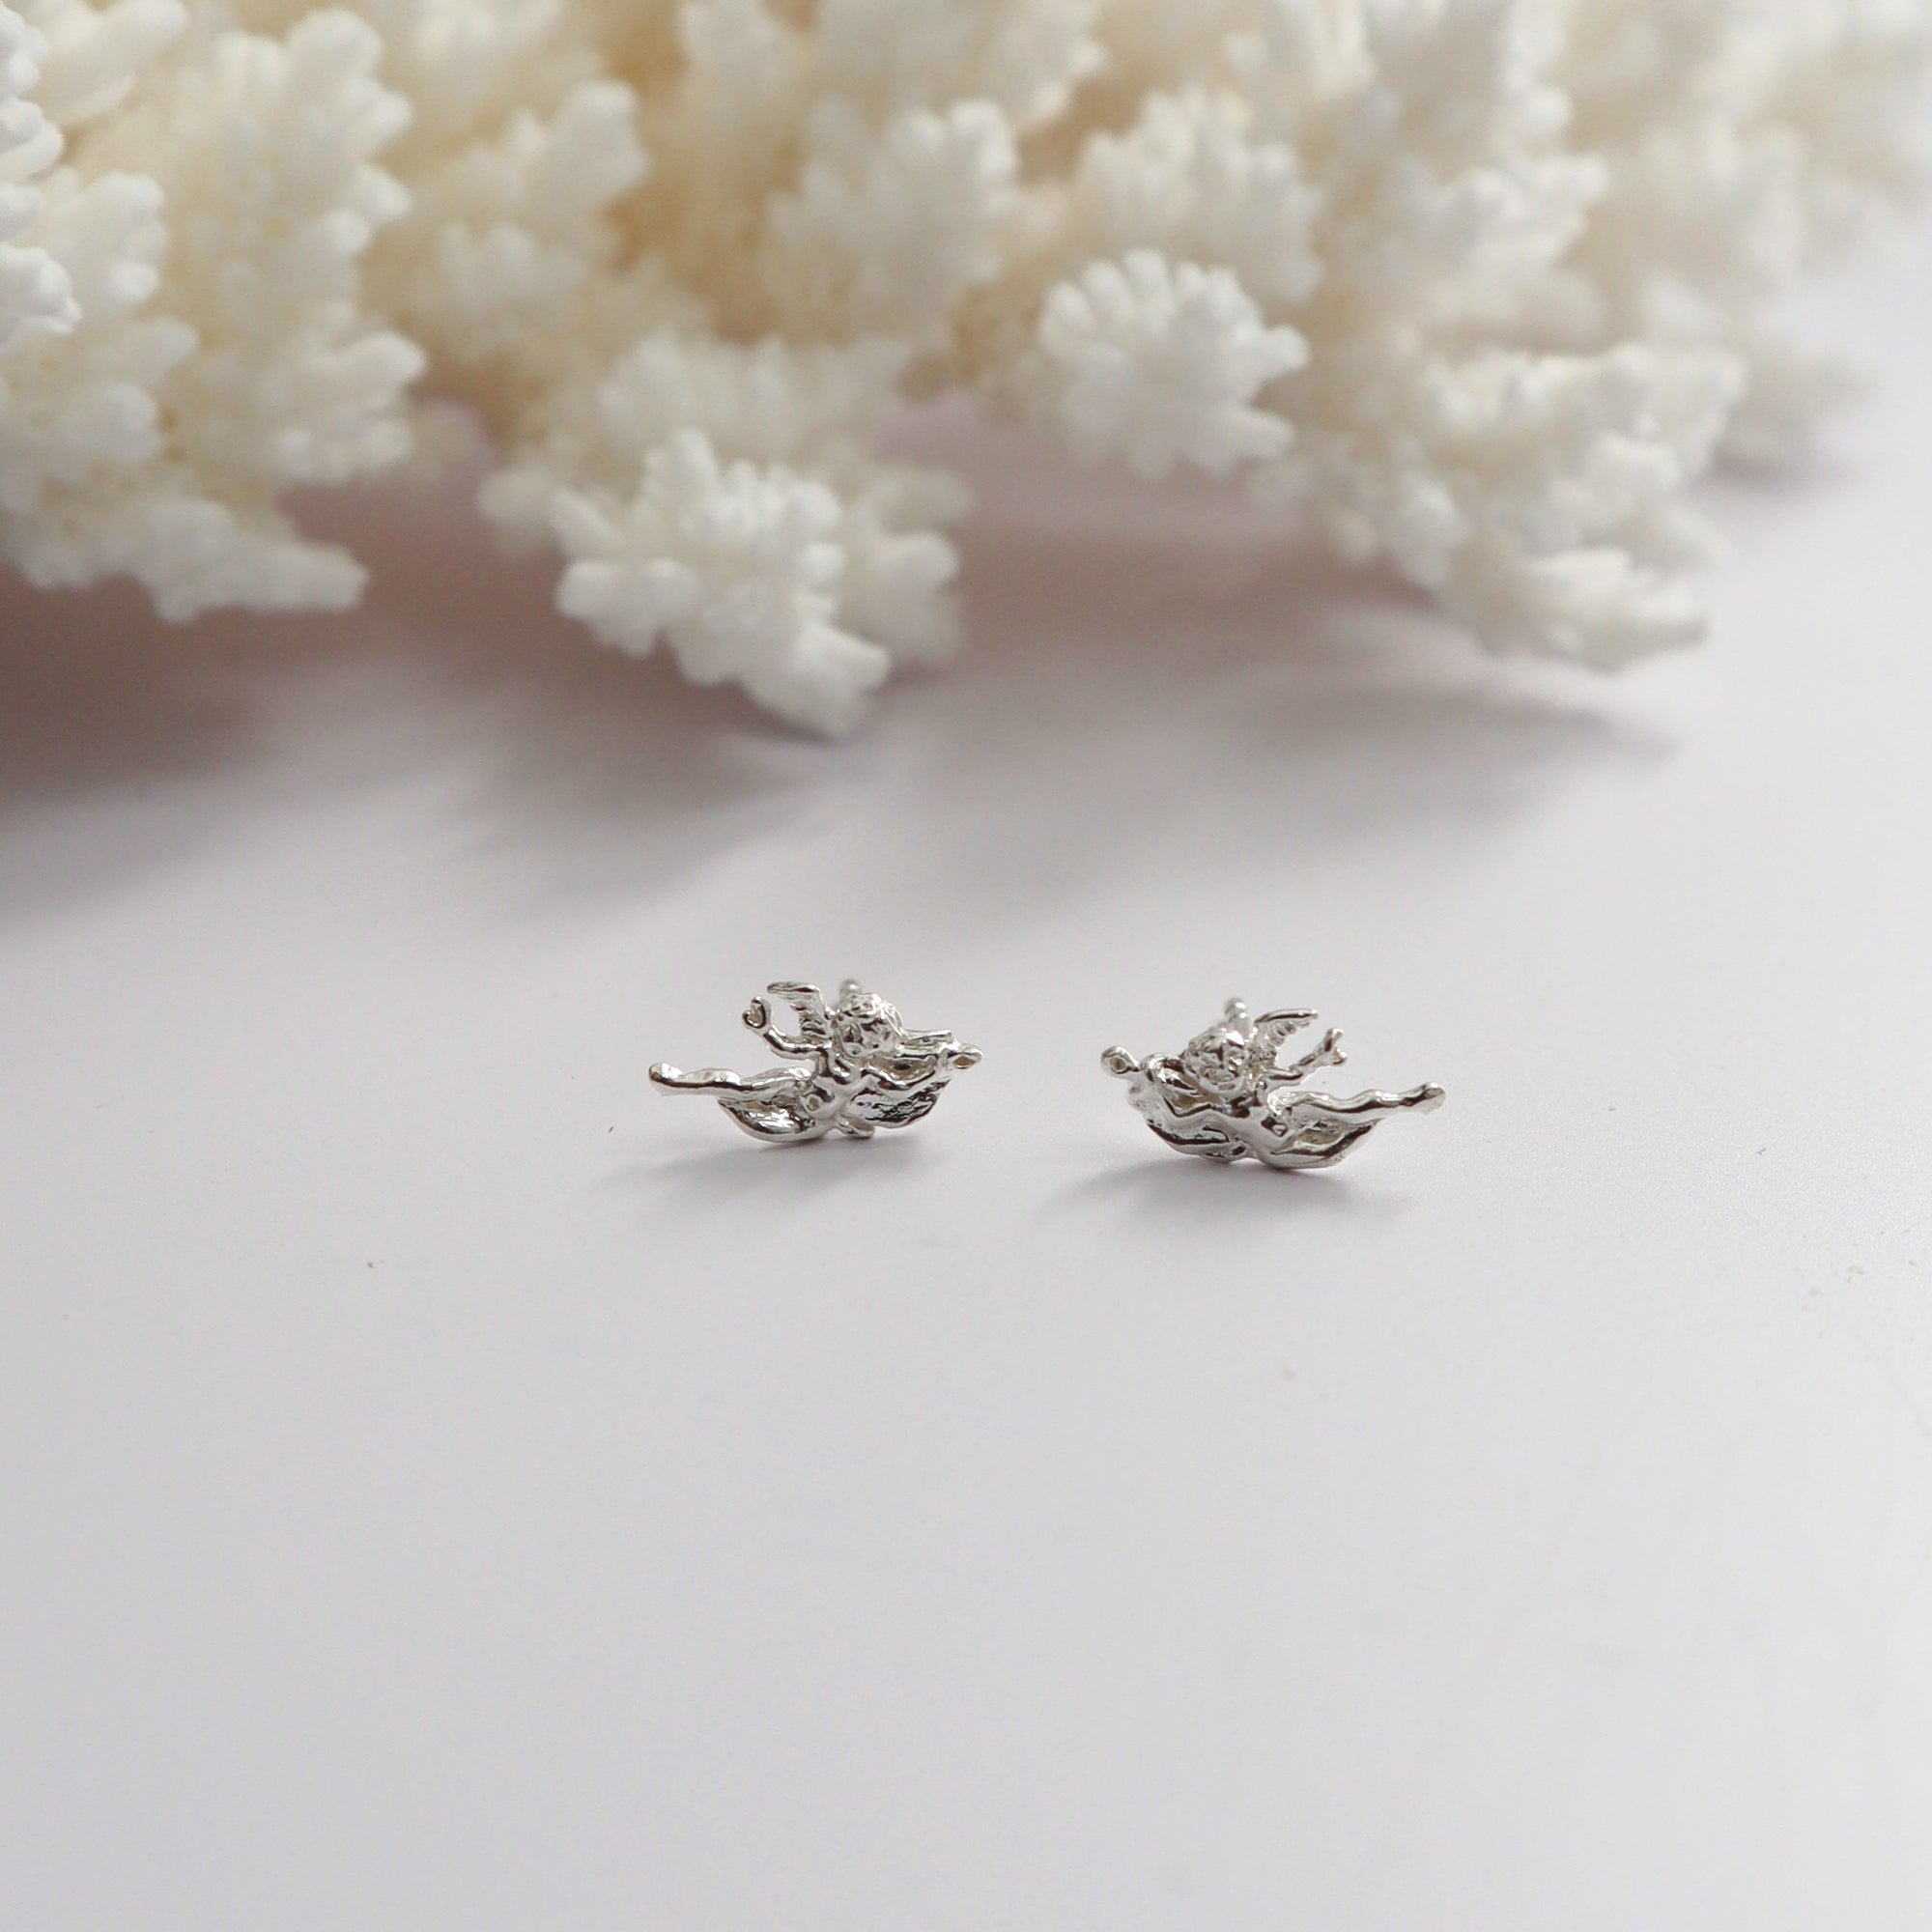 CLEOPATRA'S BLING ARETINO STUDS: SILVER